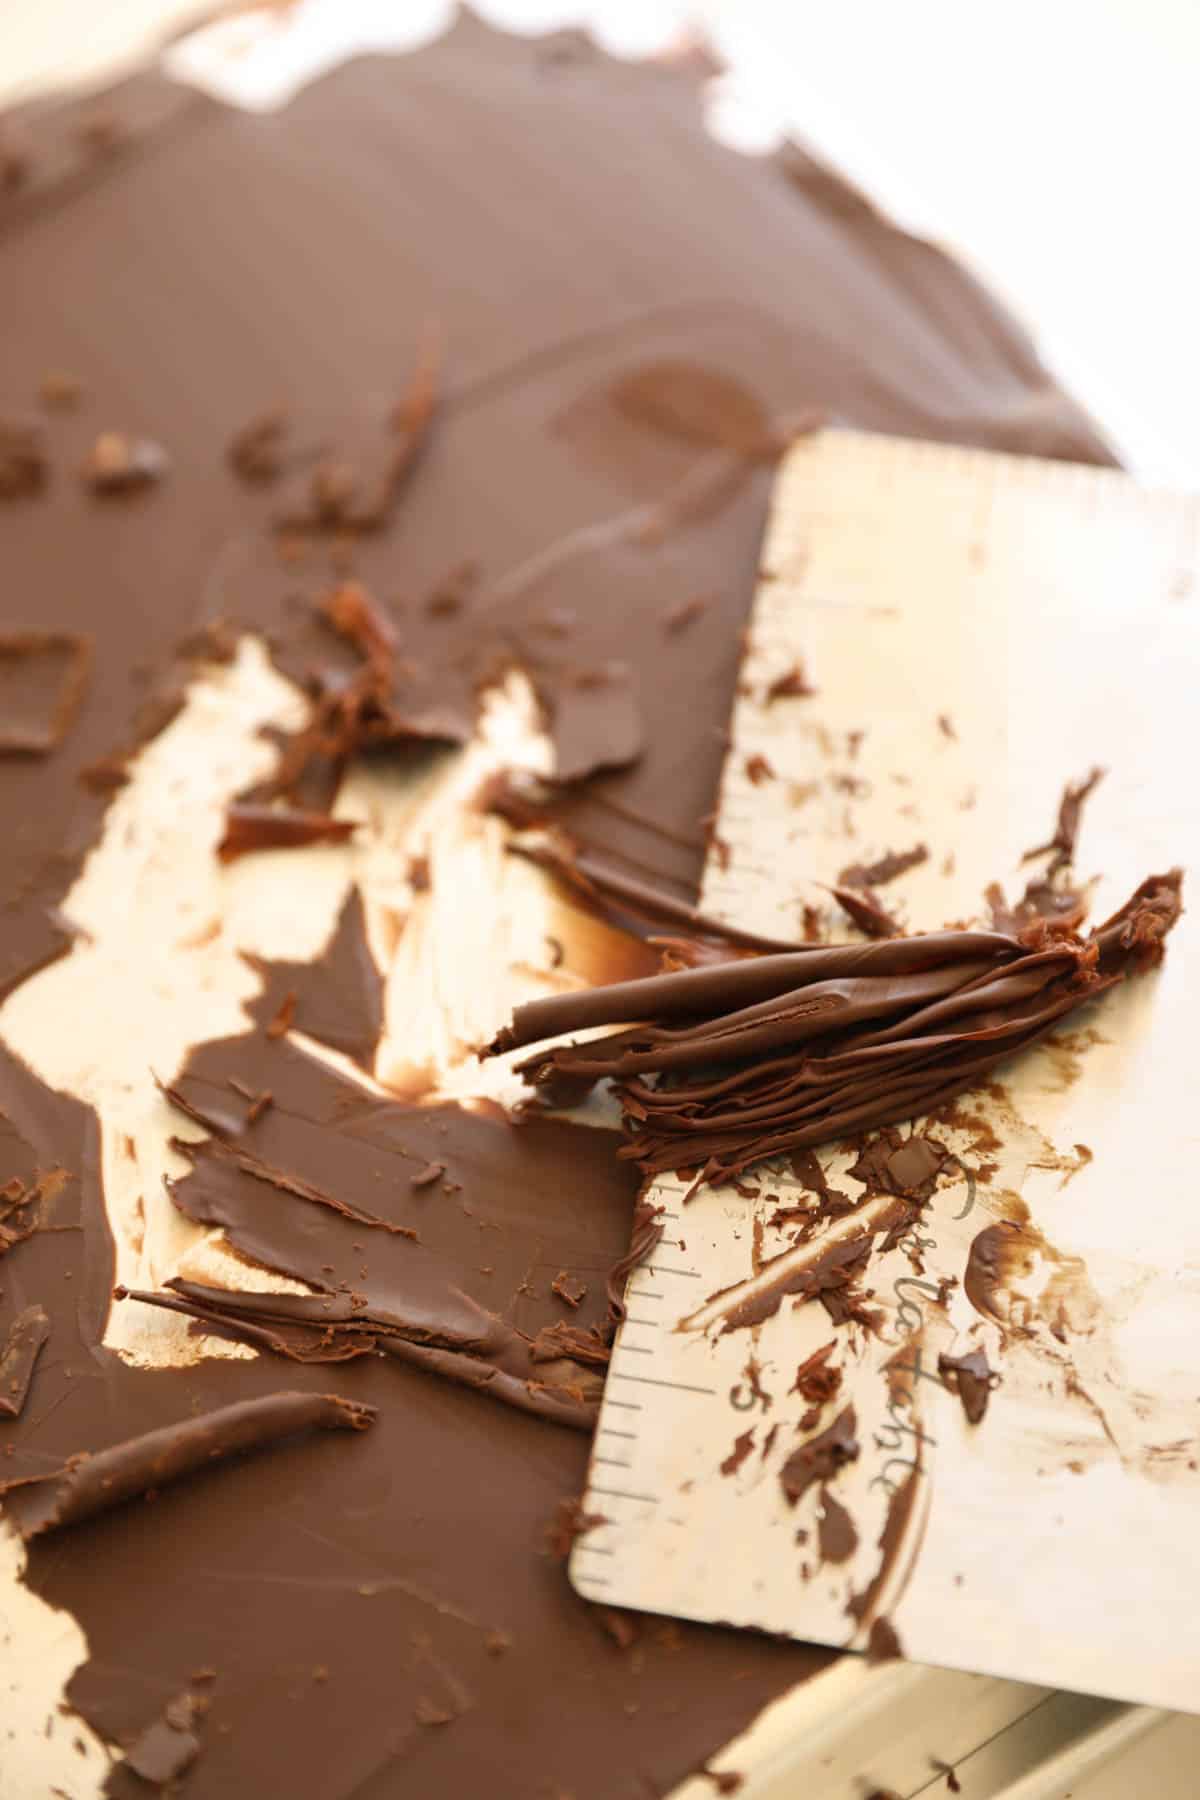 chocolate shavings made with a bench scrape